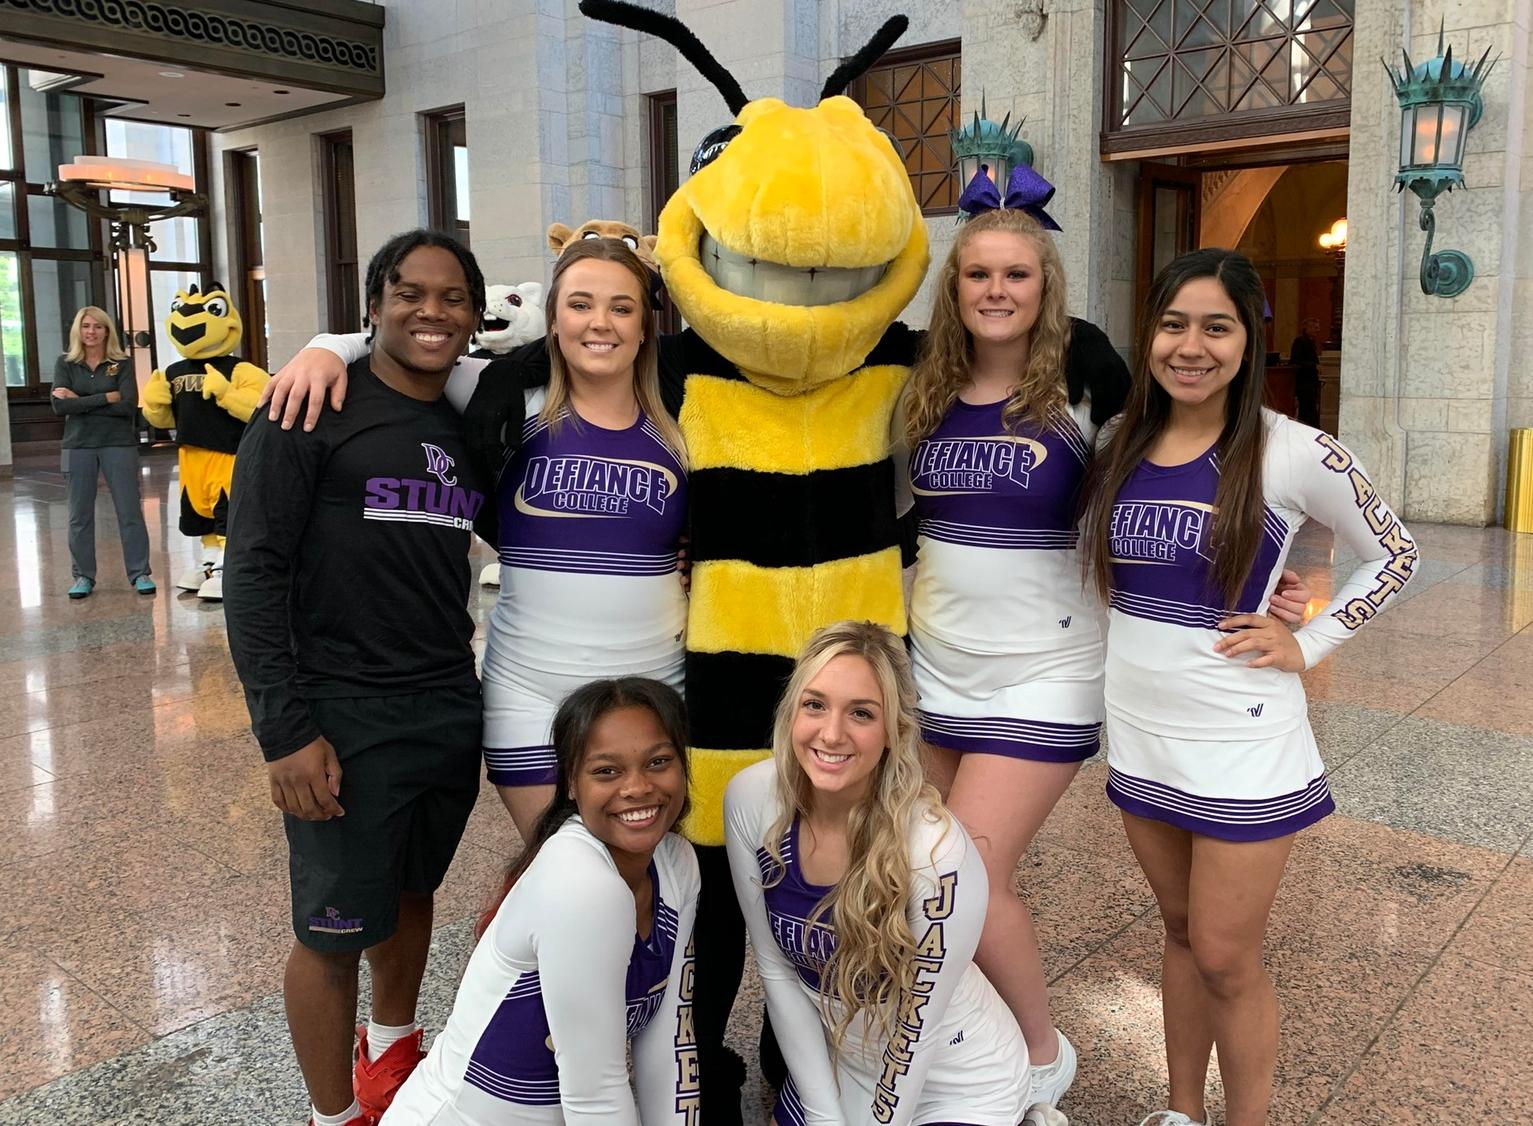 Buzz, Cheer and Dance represent Defiance at Mascot Day